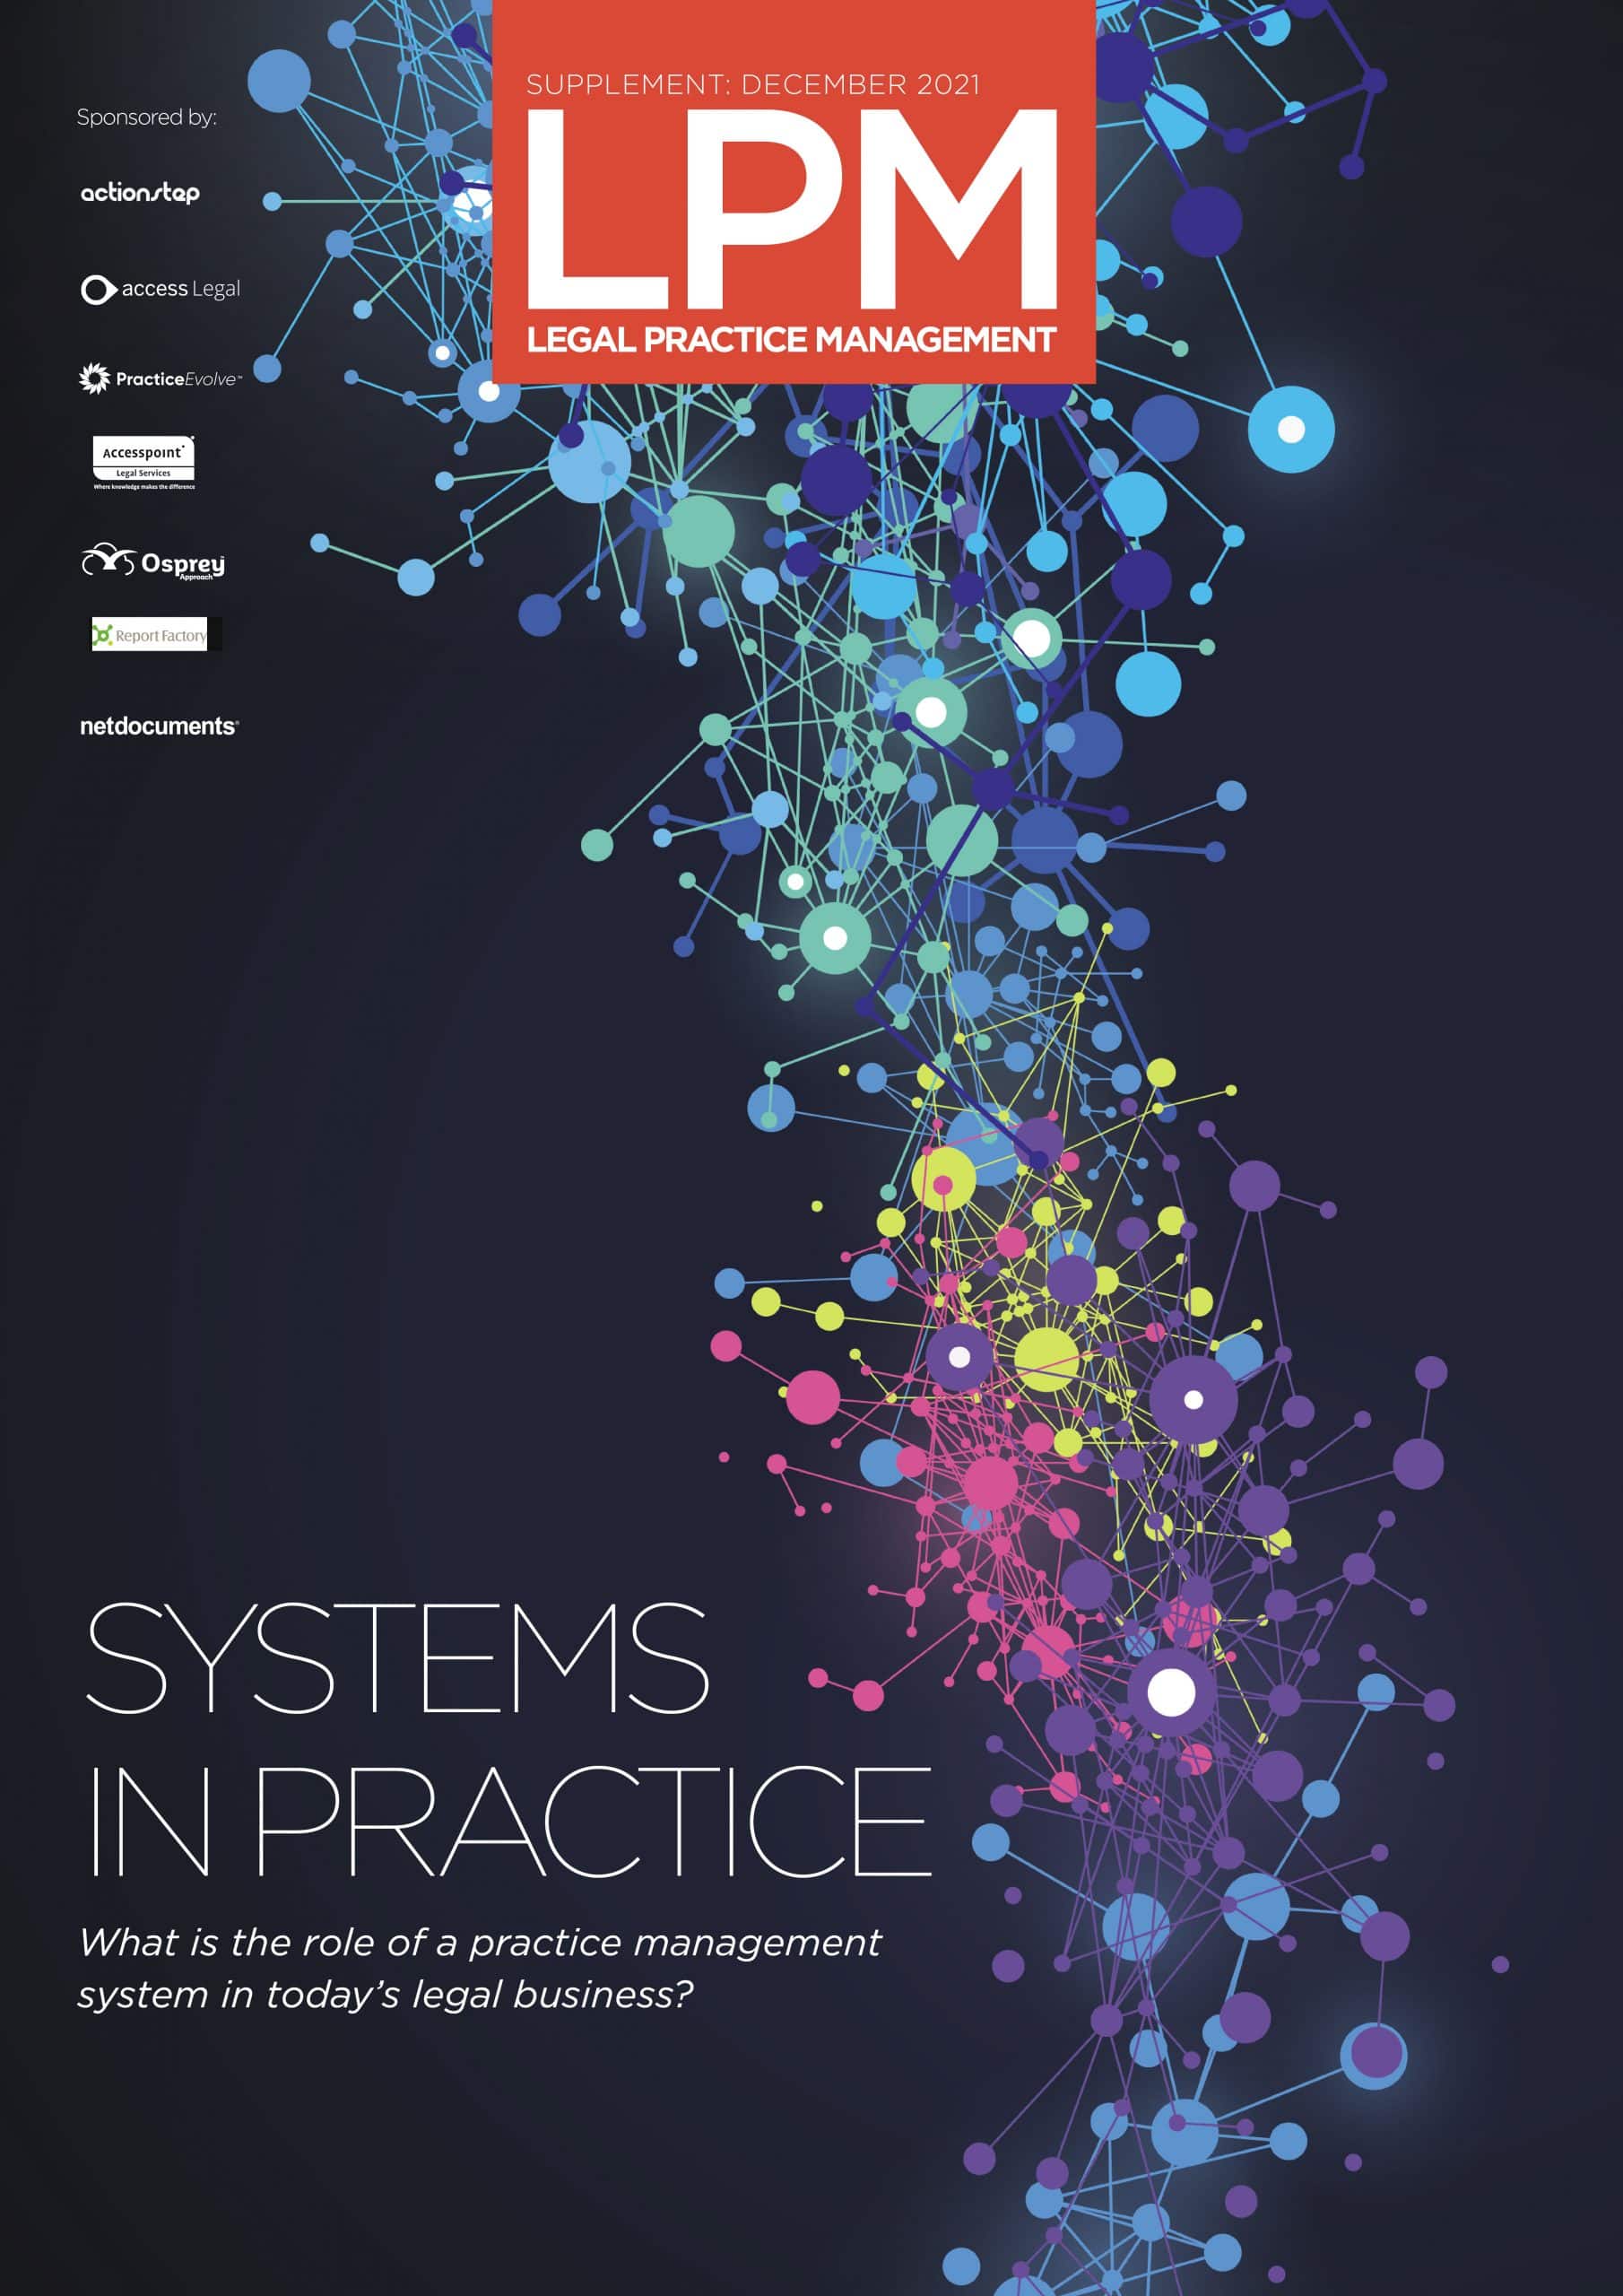 Systems in practice